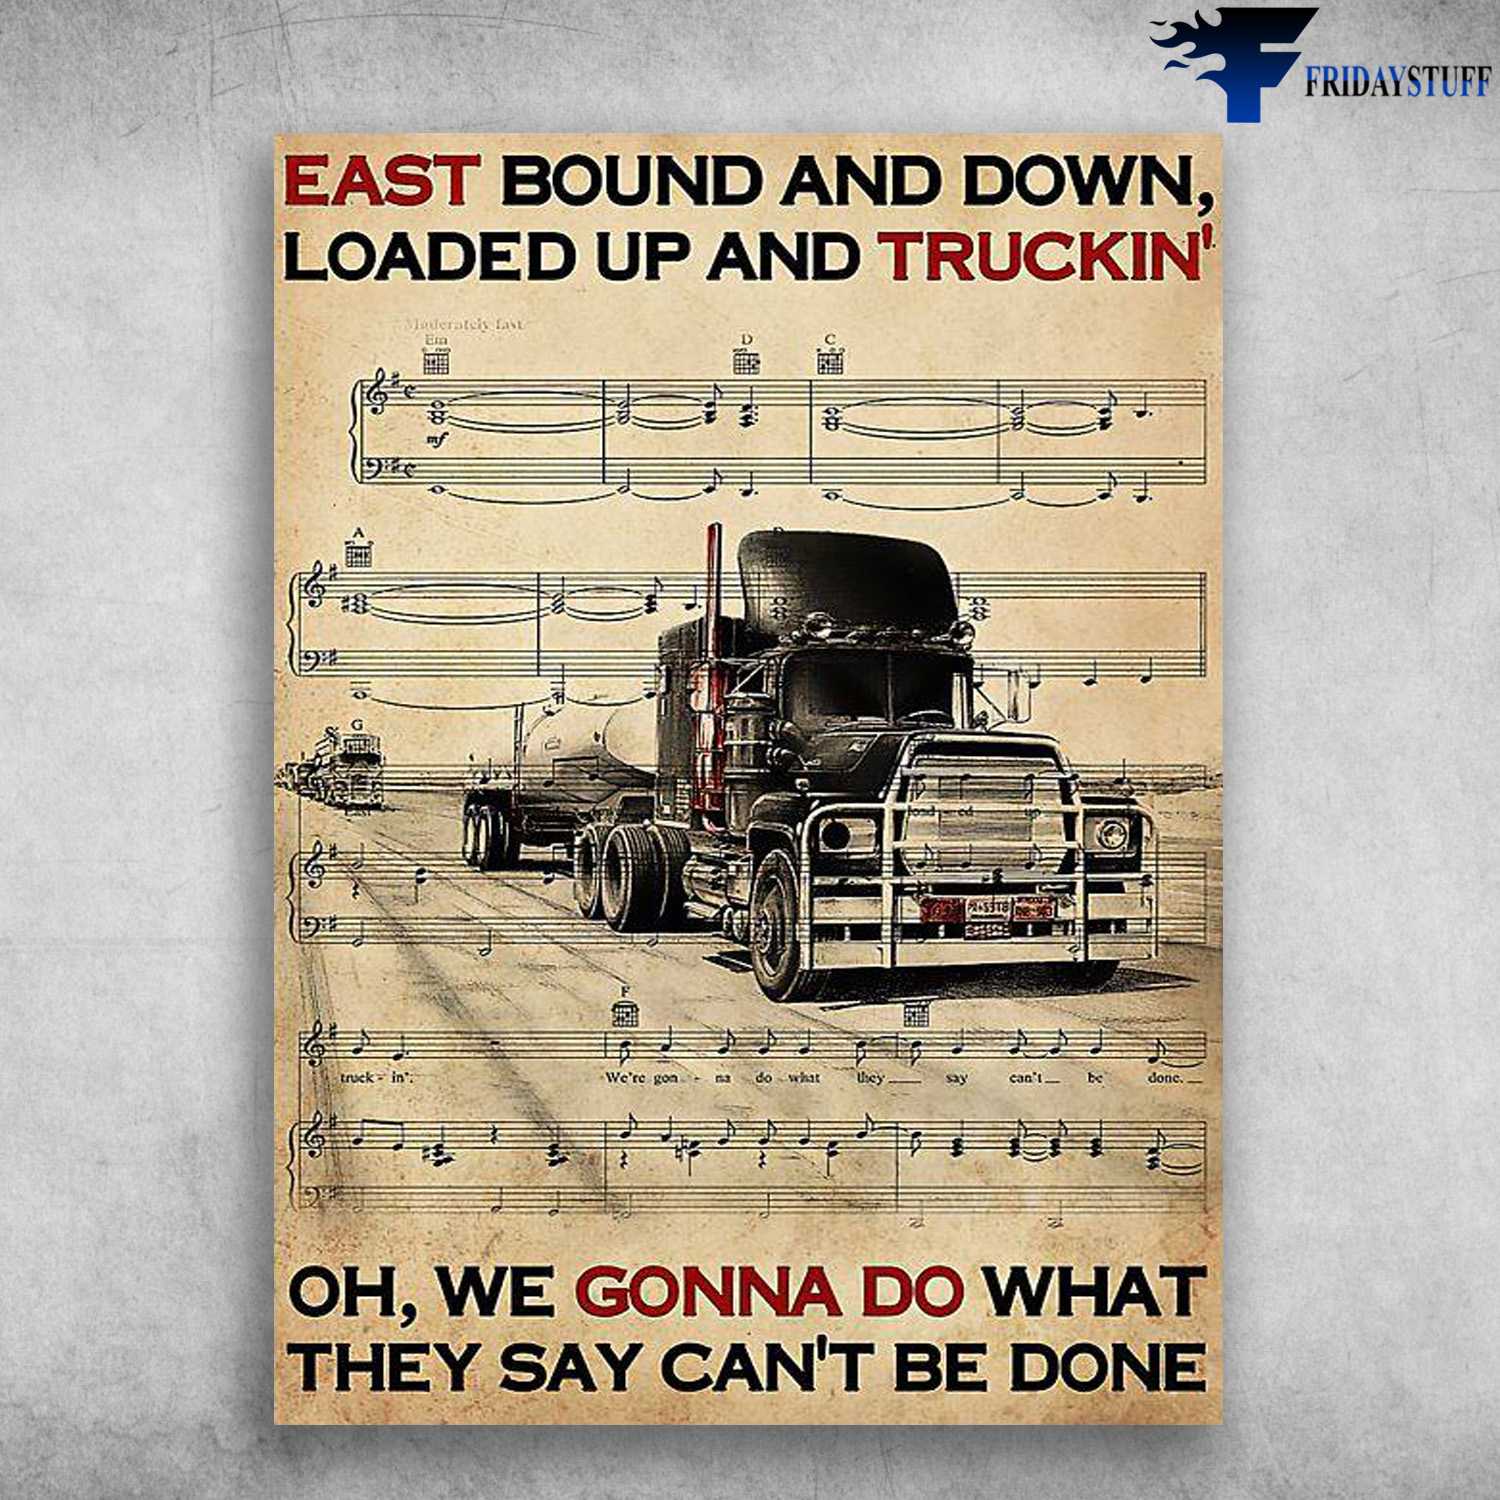 Trucker Poster, Driver Lover, East Bound And Down, Loaded Up And Truckin', Oh We Gonna Do What They Say Can't Be Done